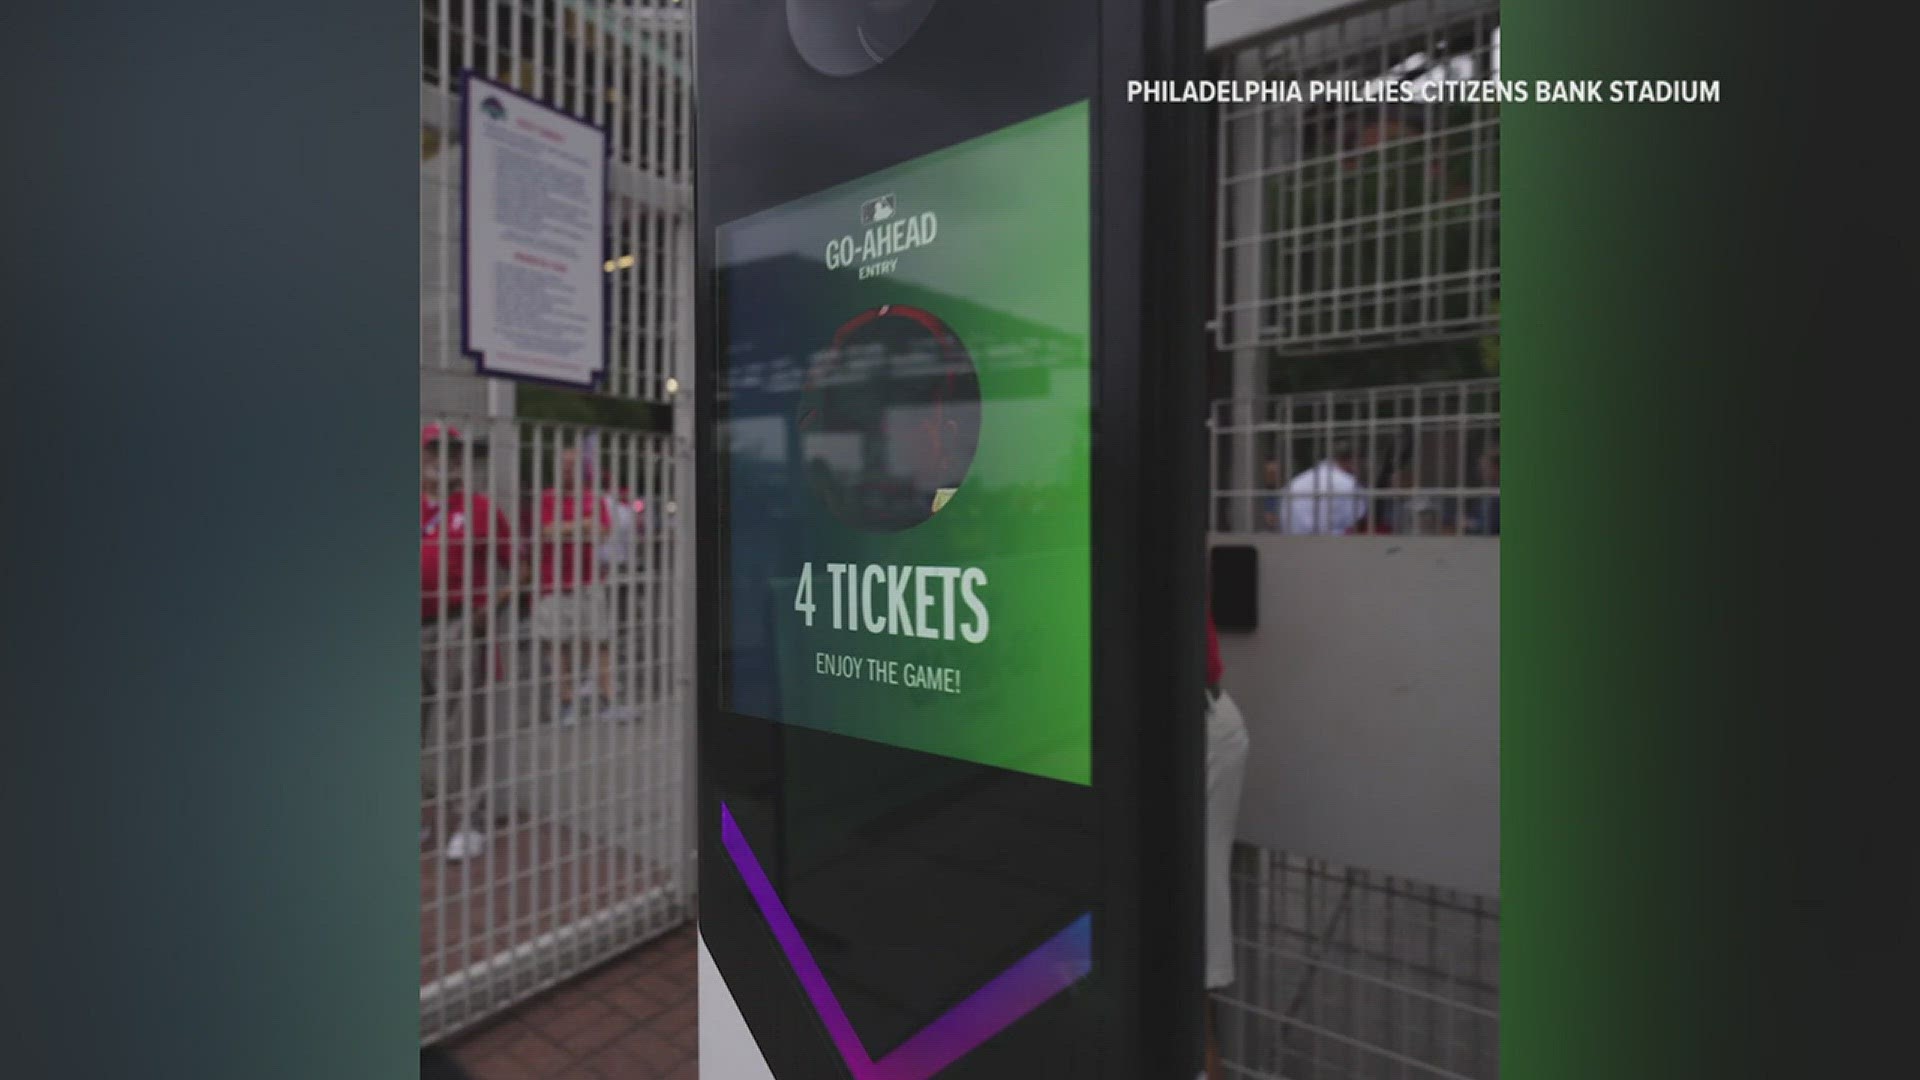 The facial recognition software allows fans to walk right into the game without scanning a physical ticket.